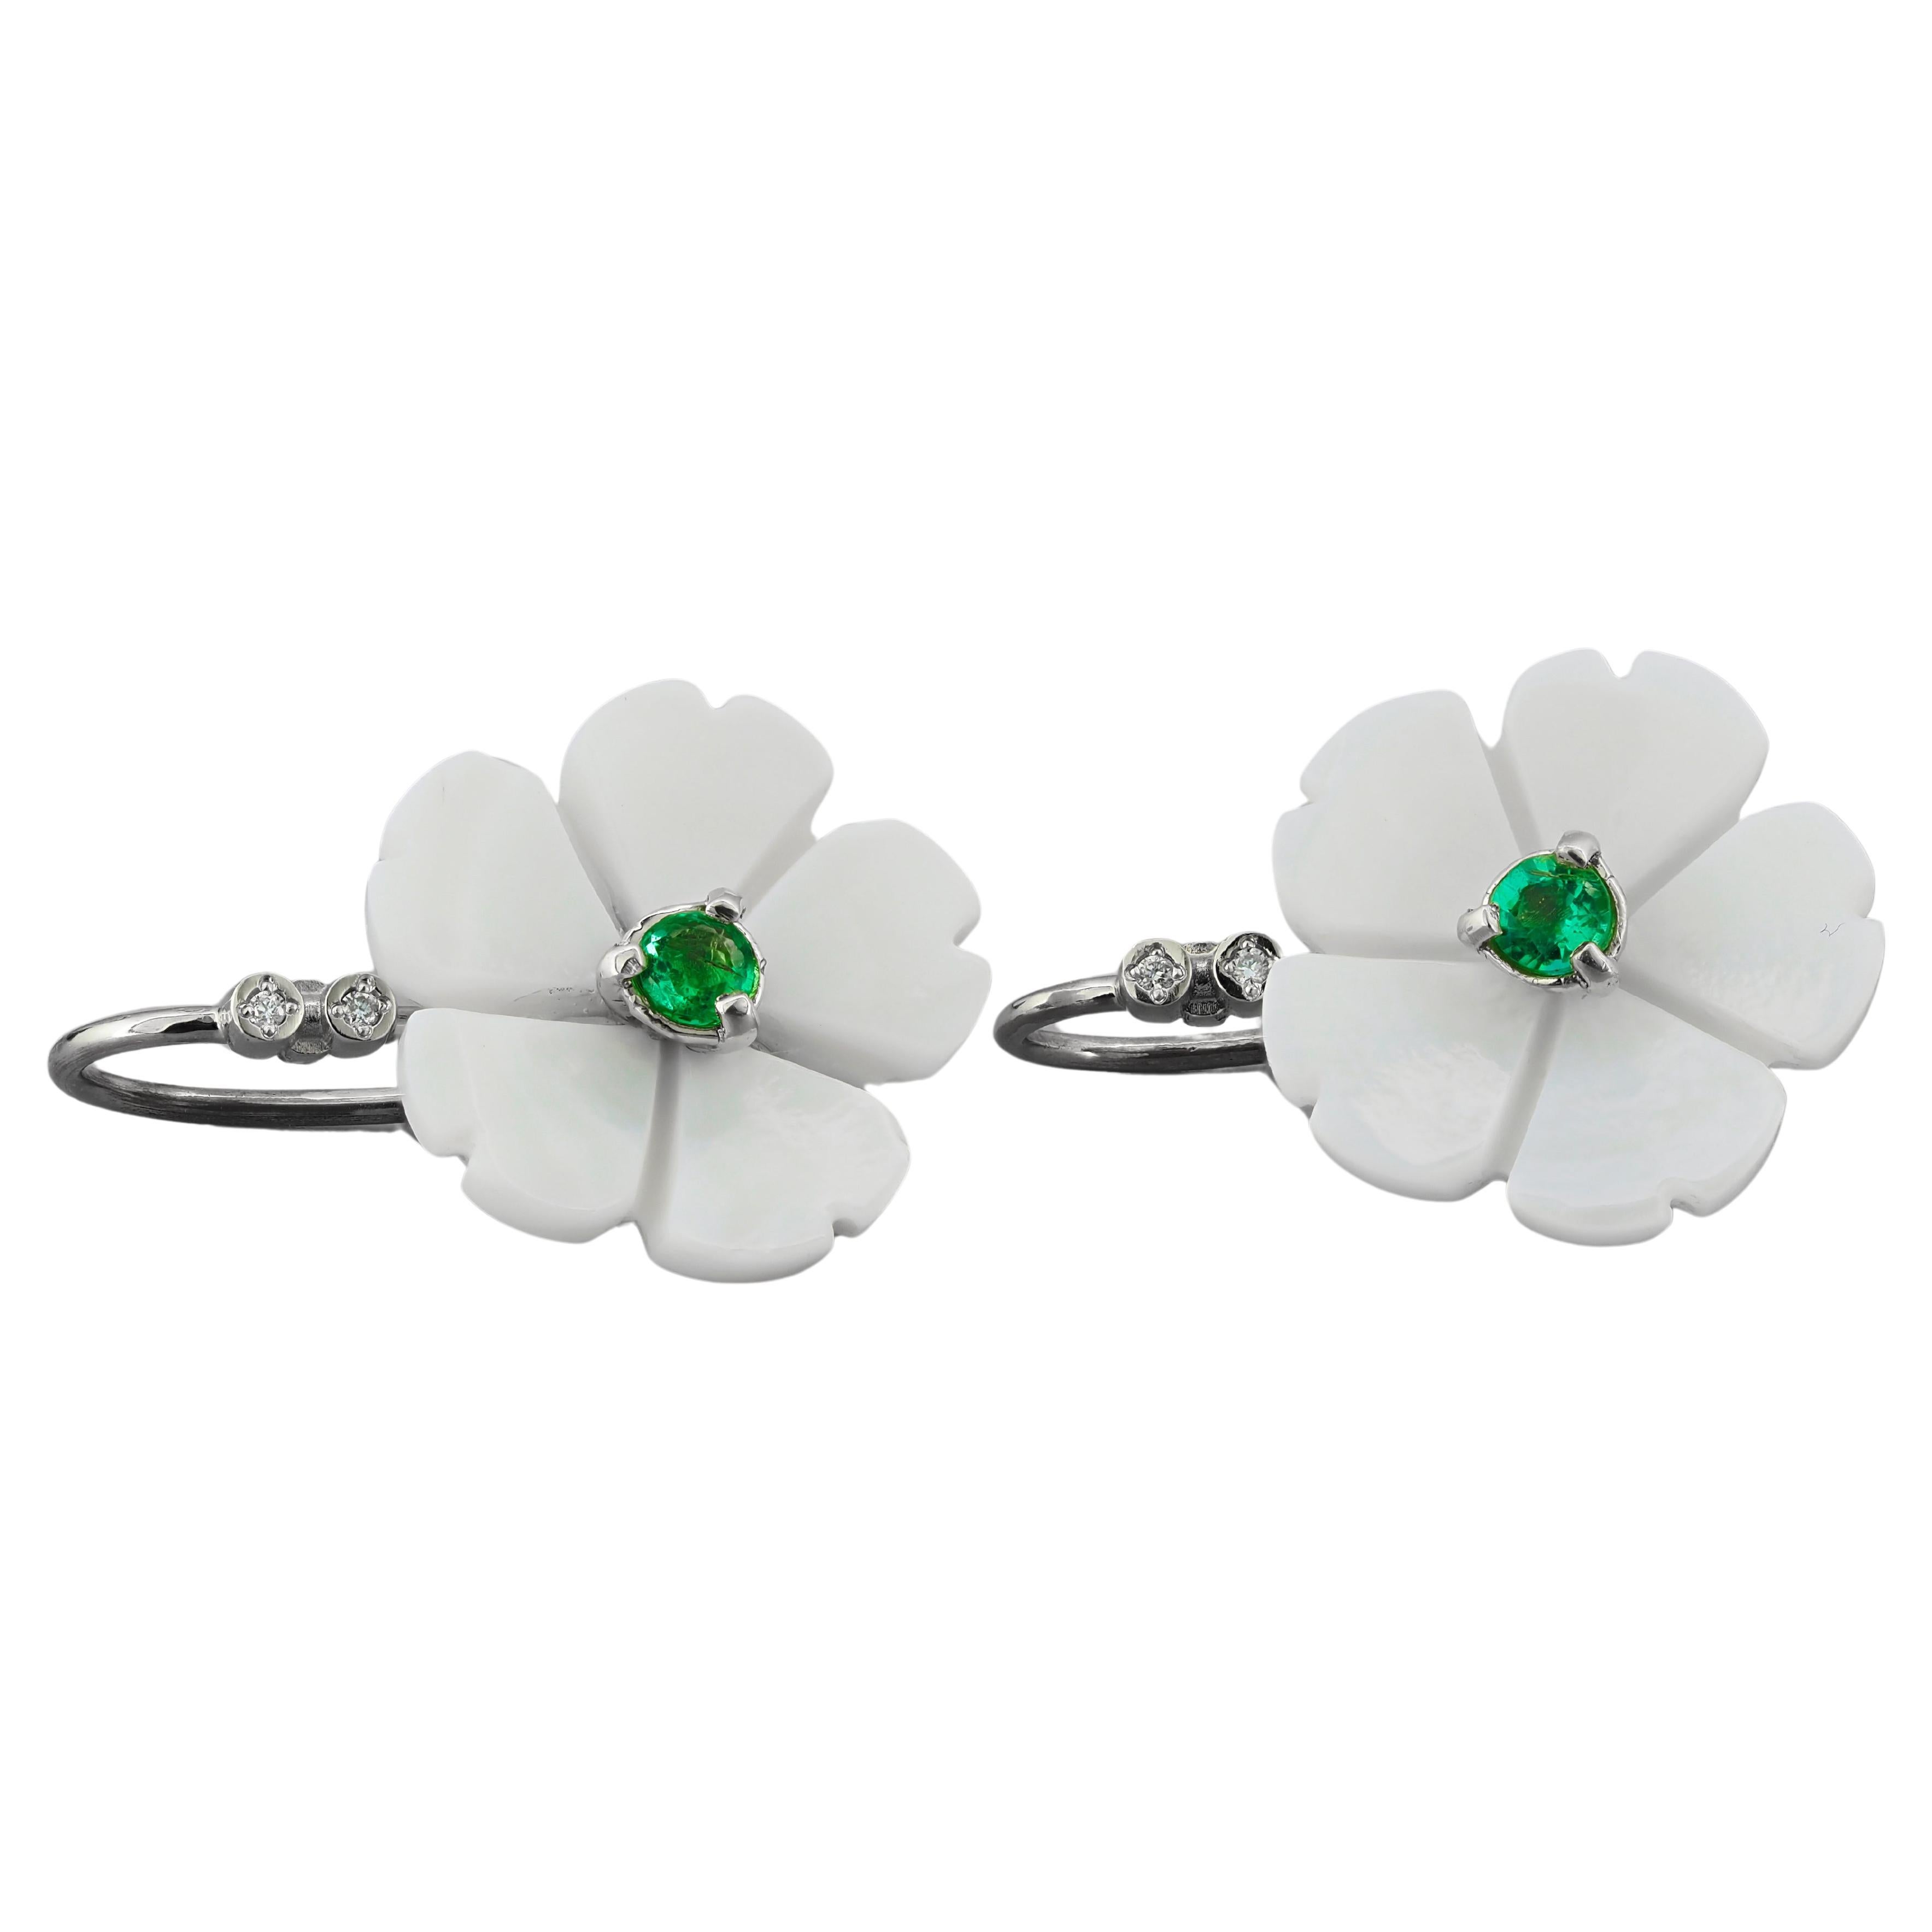 Flower 14k gold earrings with emeralds.  For Sale